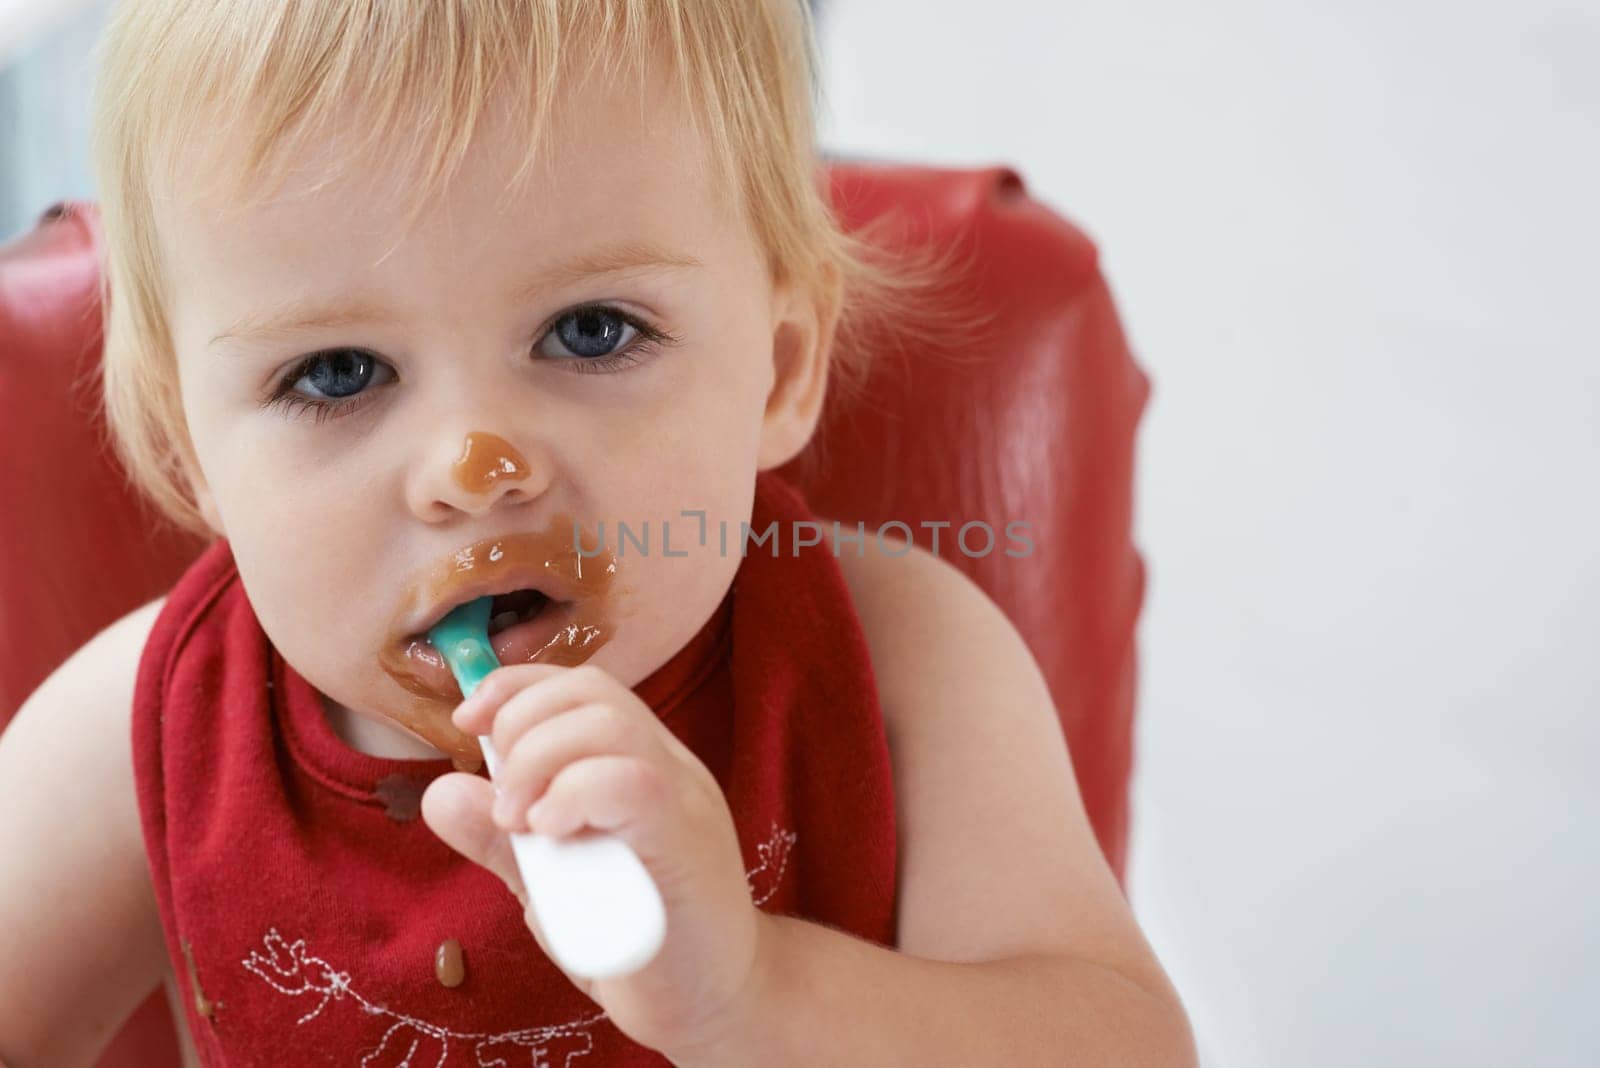 Hungry, portrait and baby eating porridge for health, nutrition or child development at home. Food, cute and girl toddler or kid enjoying organic puree meal for lunch or dinner in high chair at house.